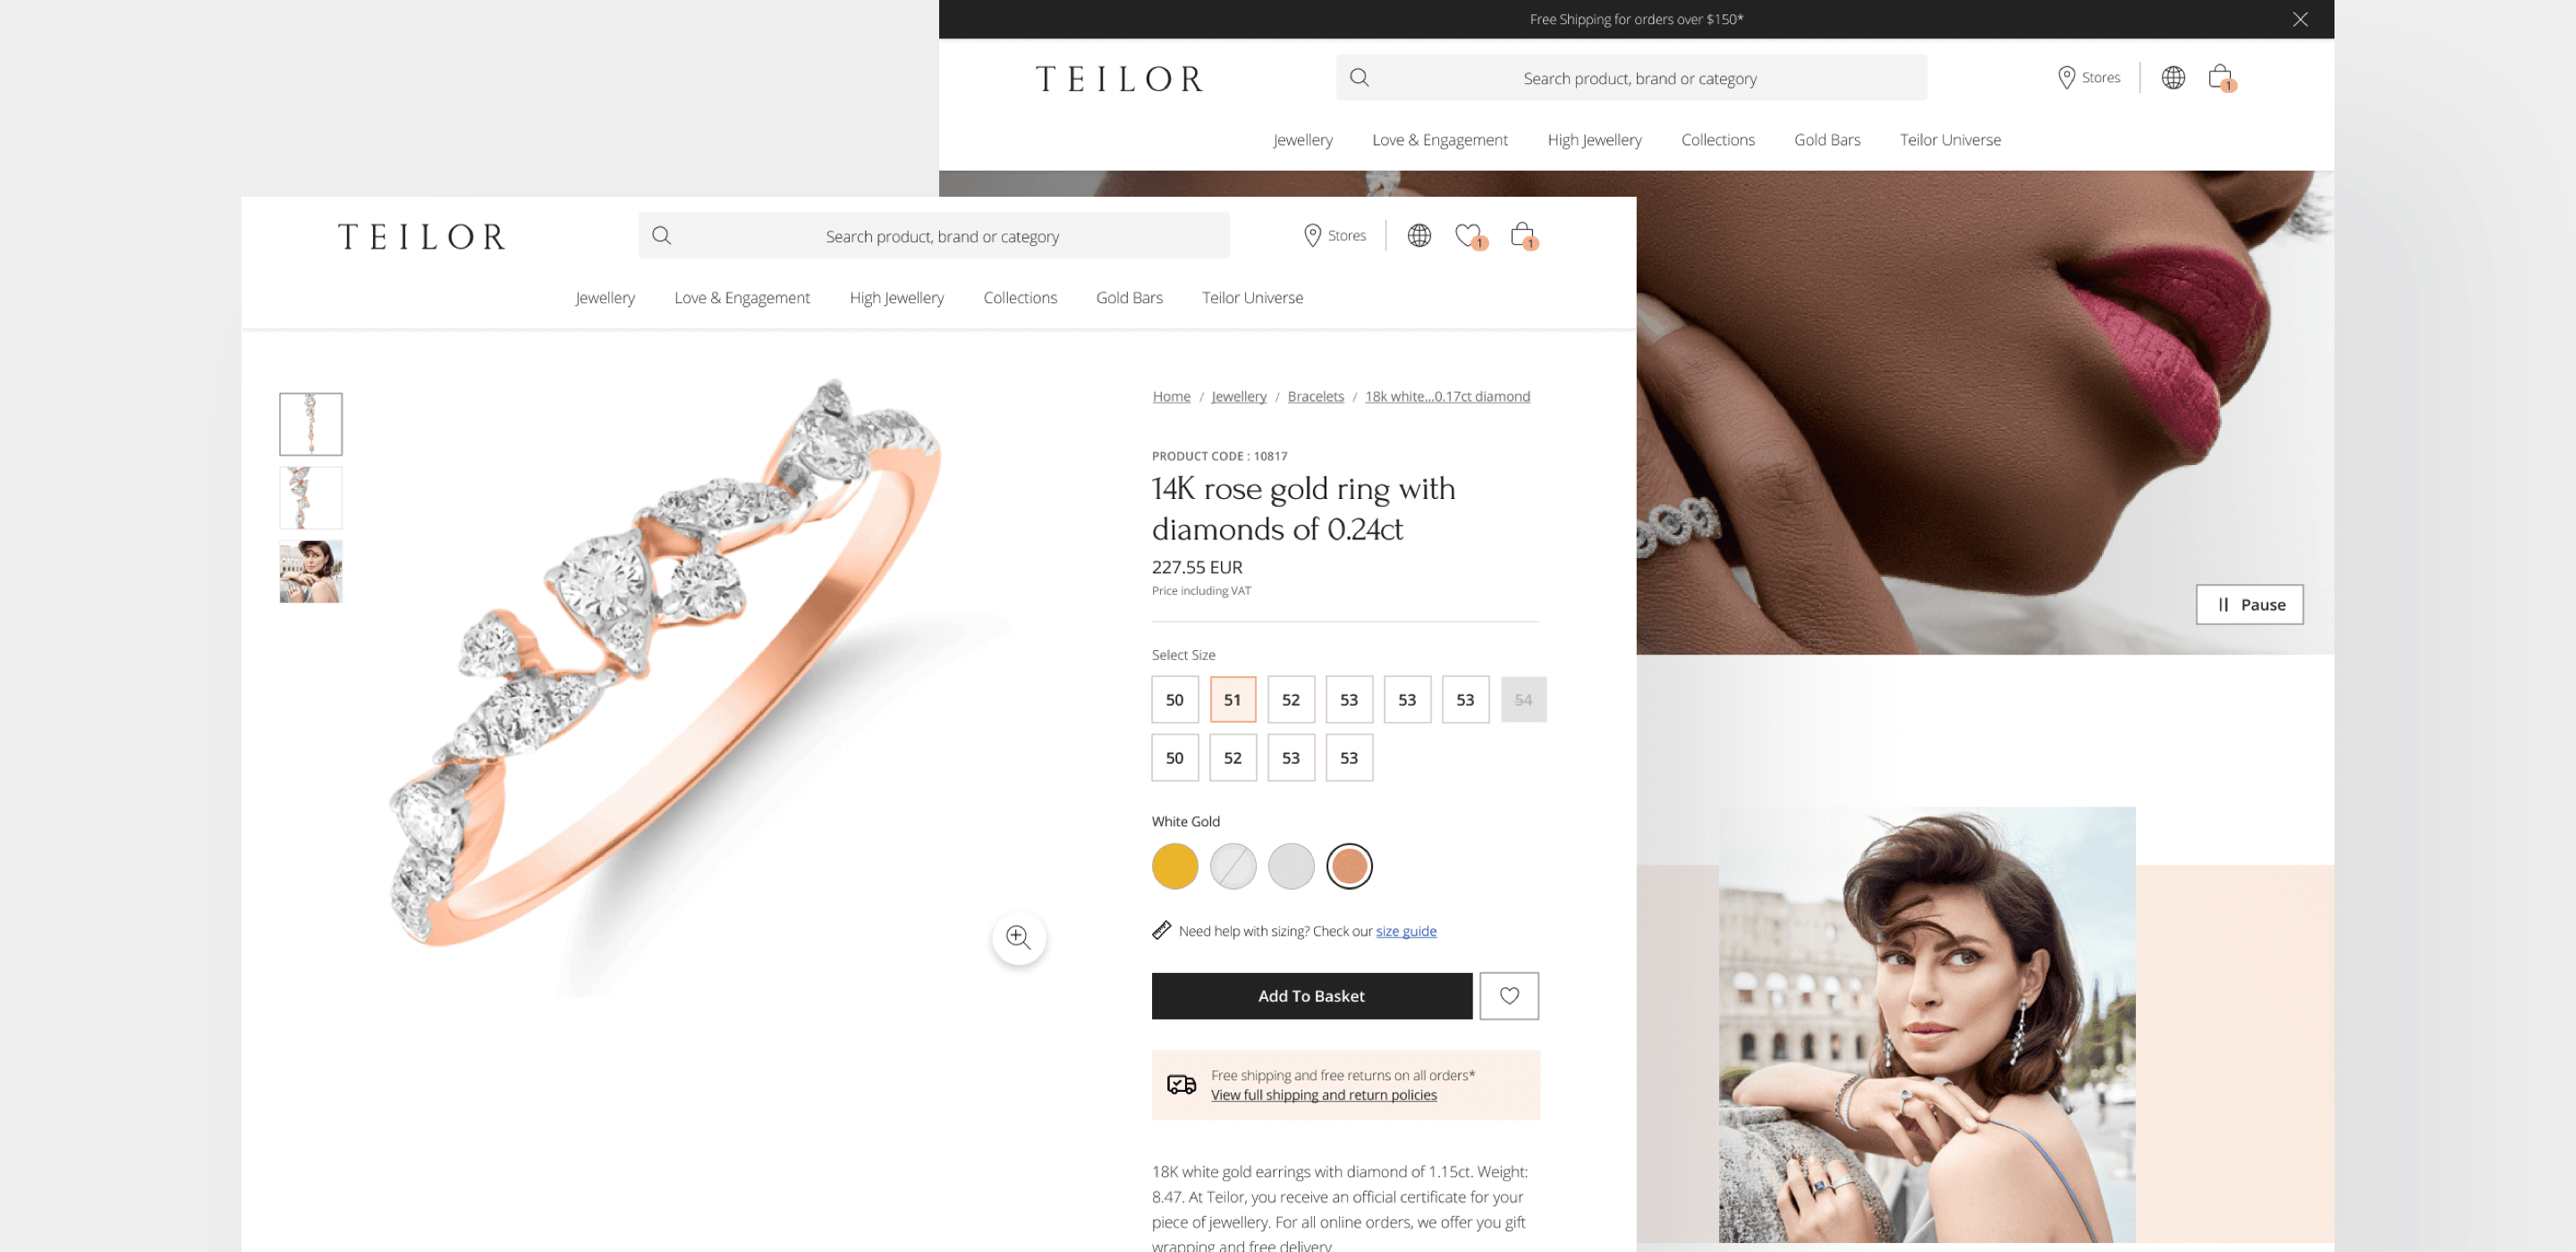 Screenshots of the Teilor Jewellery website. There is a bracelet product page showing details about the piece and inclues the interactive size picker.